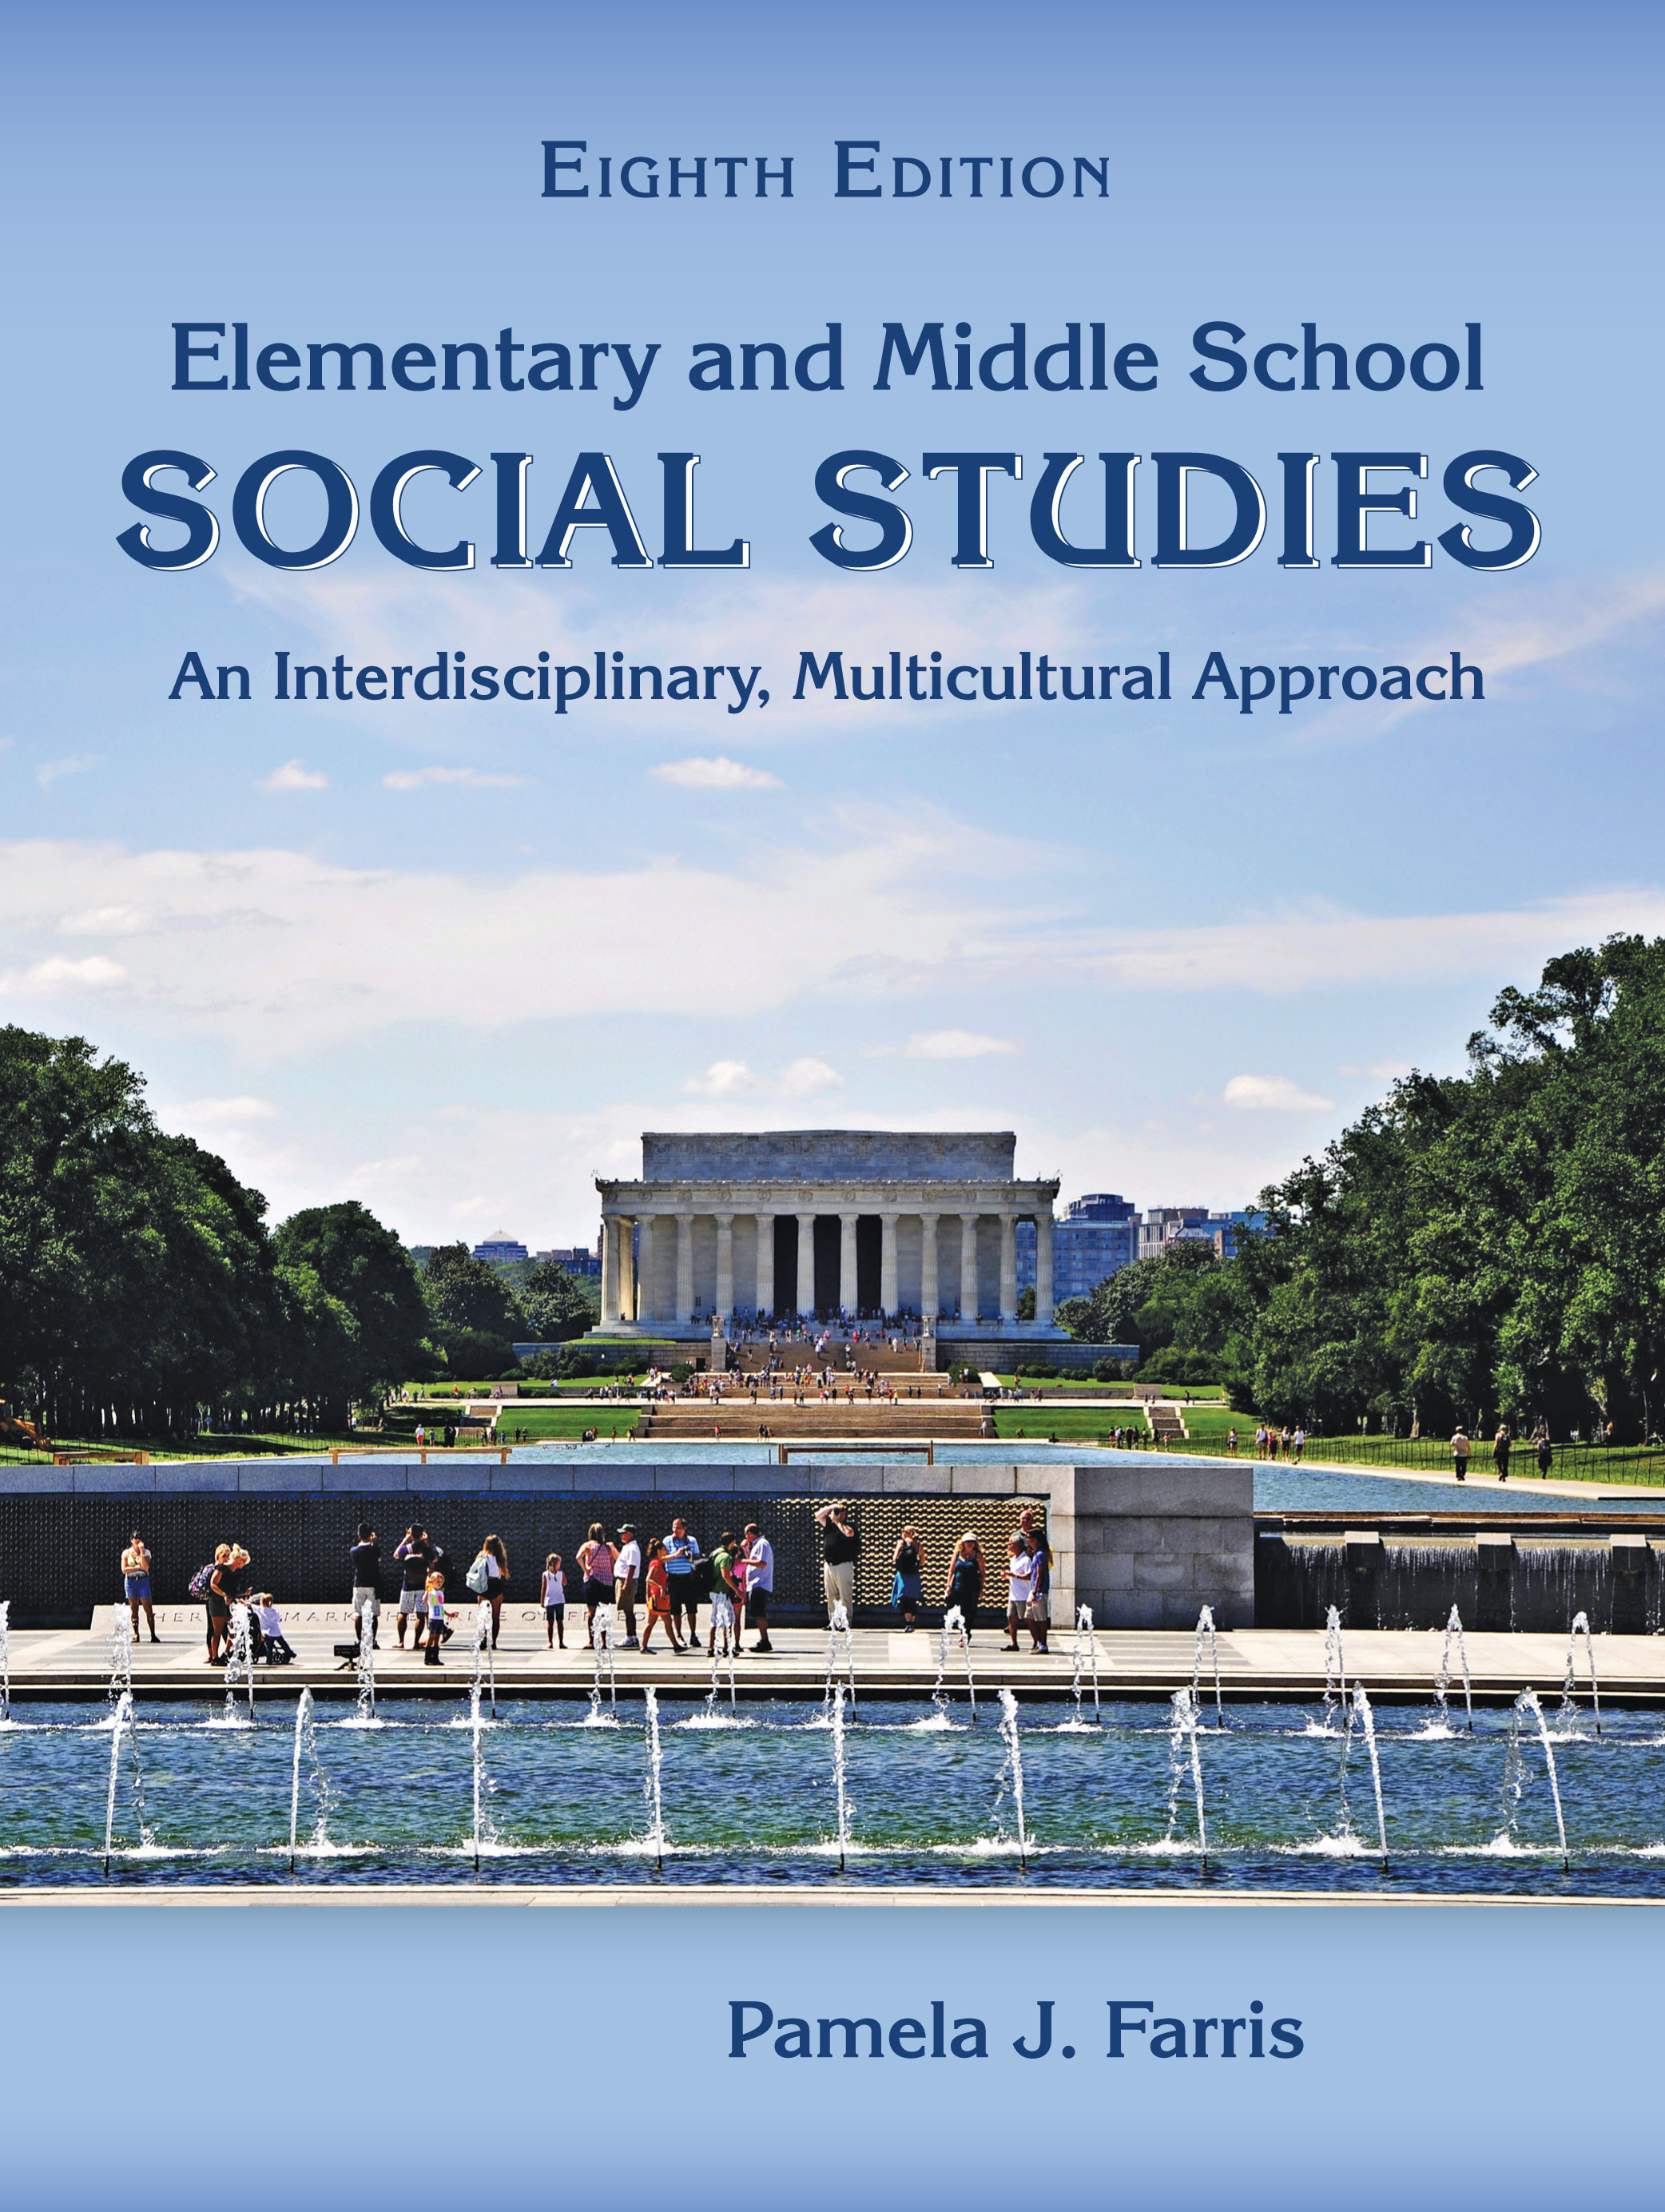 Elementary and Middle School Social Studies: An Interdisciplinary, Multicultural Approach by Pamela J. Farris